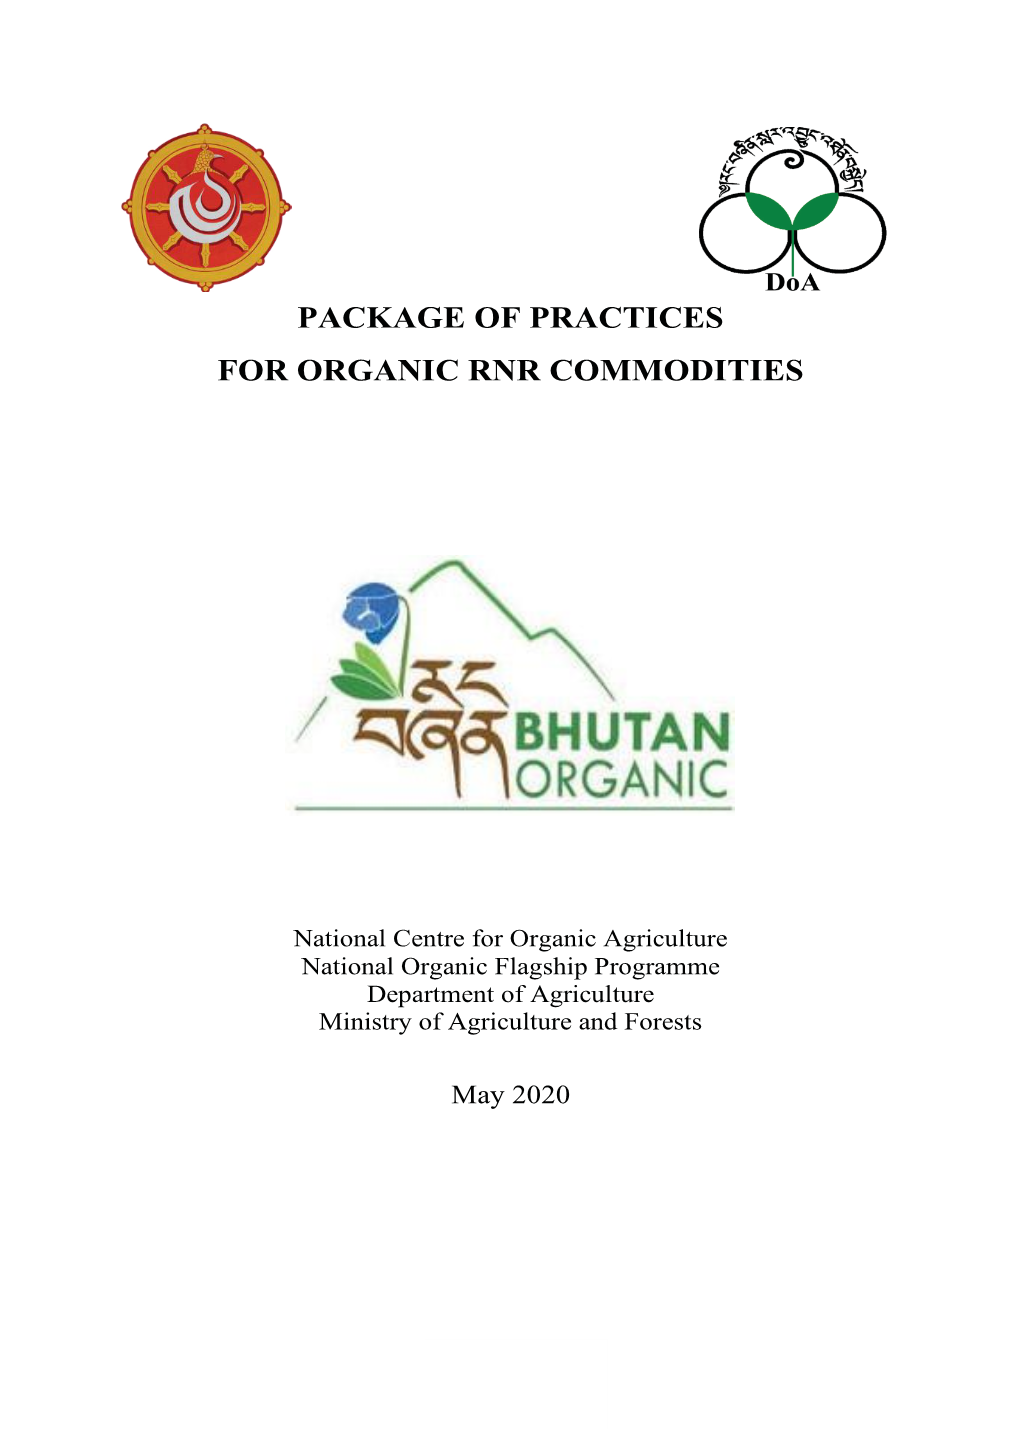 Package of Practices for Organic Rnr Commodities